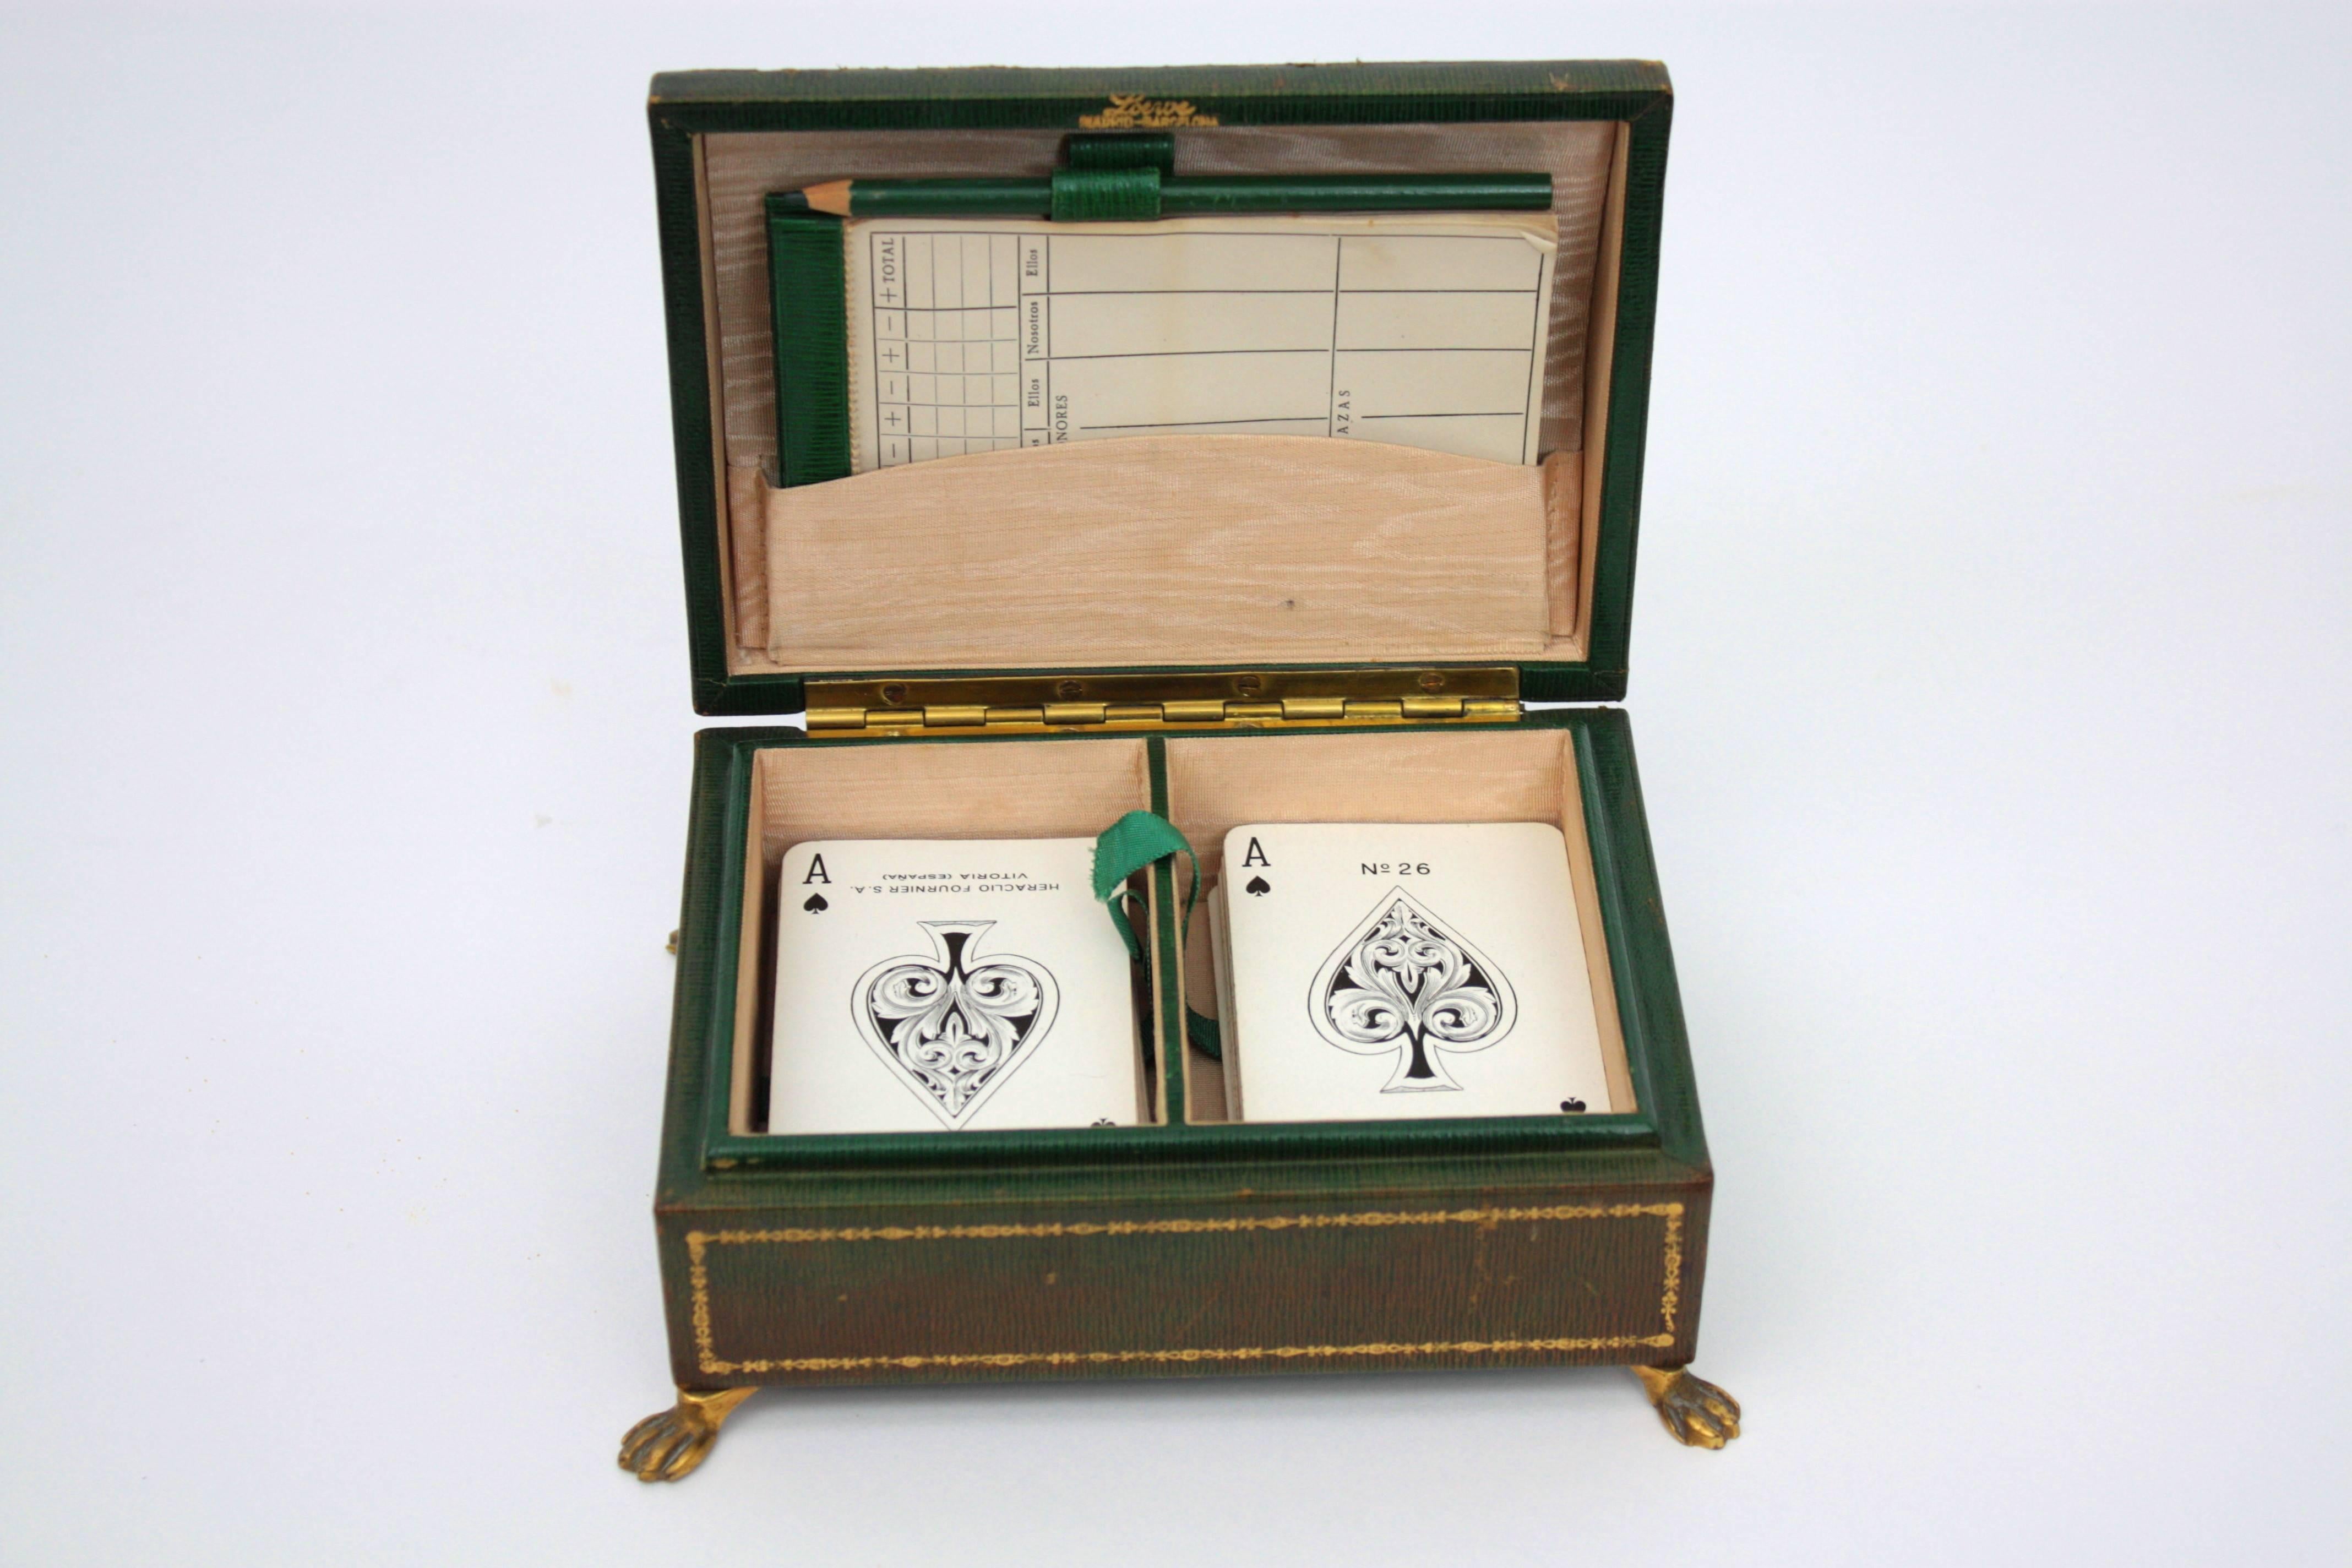 A fine Loewe leather cofre playing cards set. Madrid, Spain, 1920s.
Double deck of 52 cards with two notebooks.
The cofre is made in green leather with engraved gold patterns and it stands up on brass claw feet.
Perfect as a gift idea.
Measures: